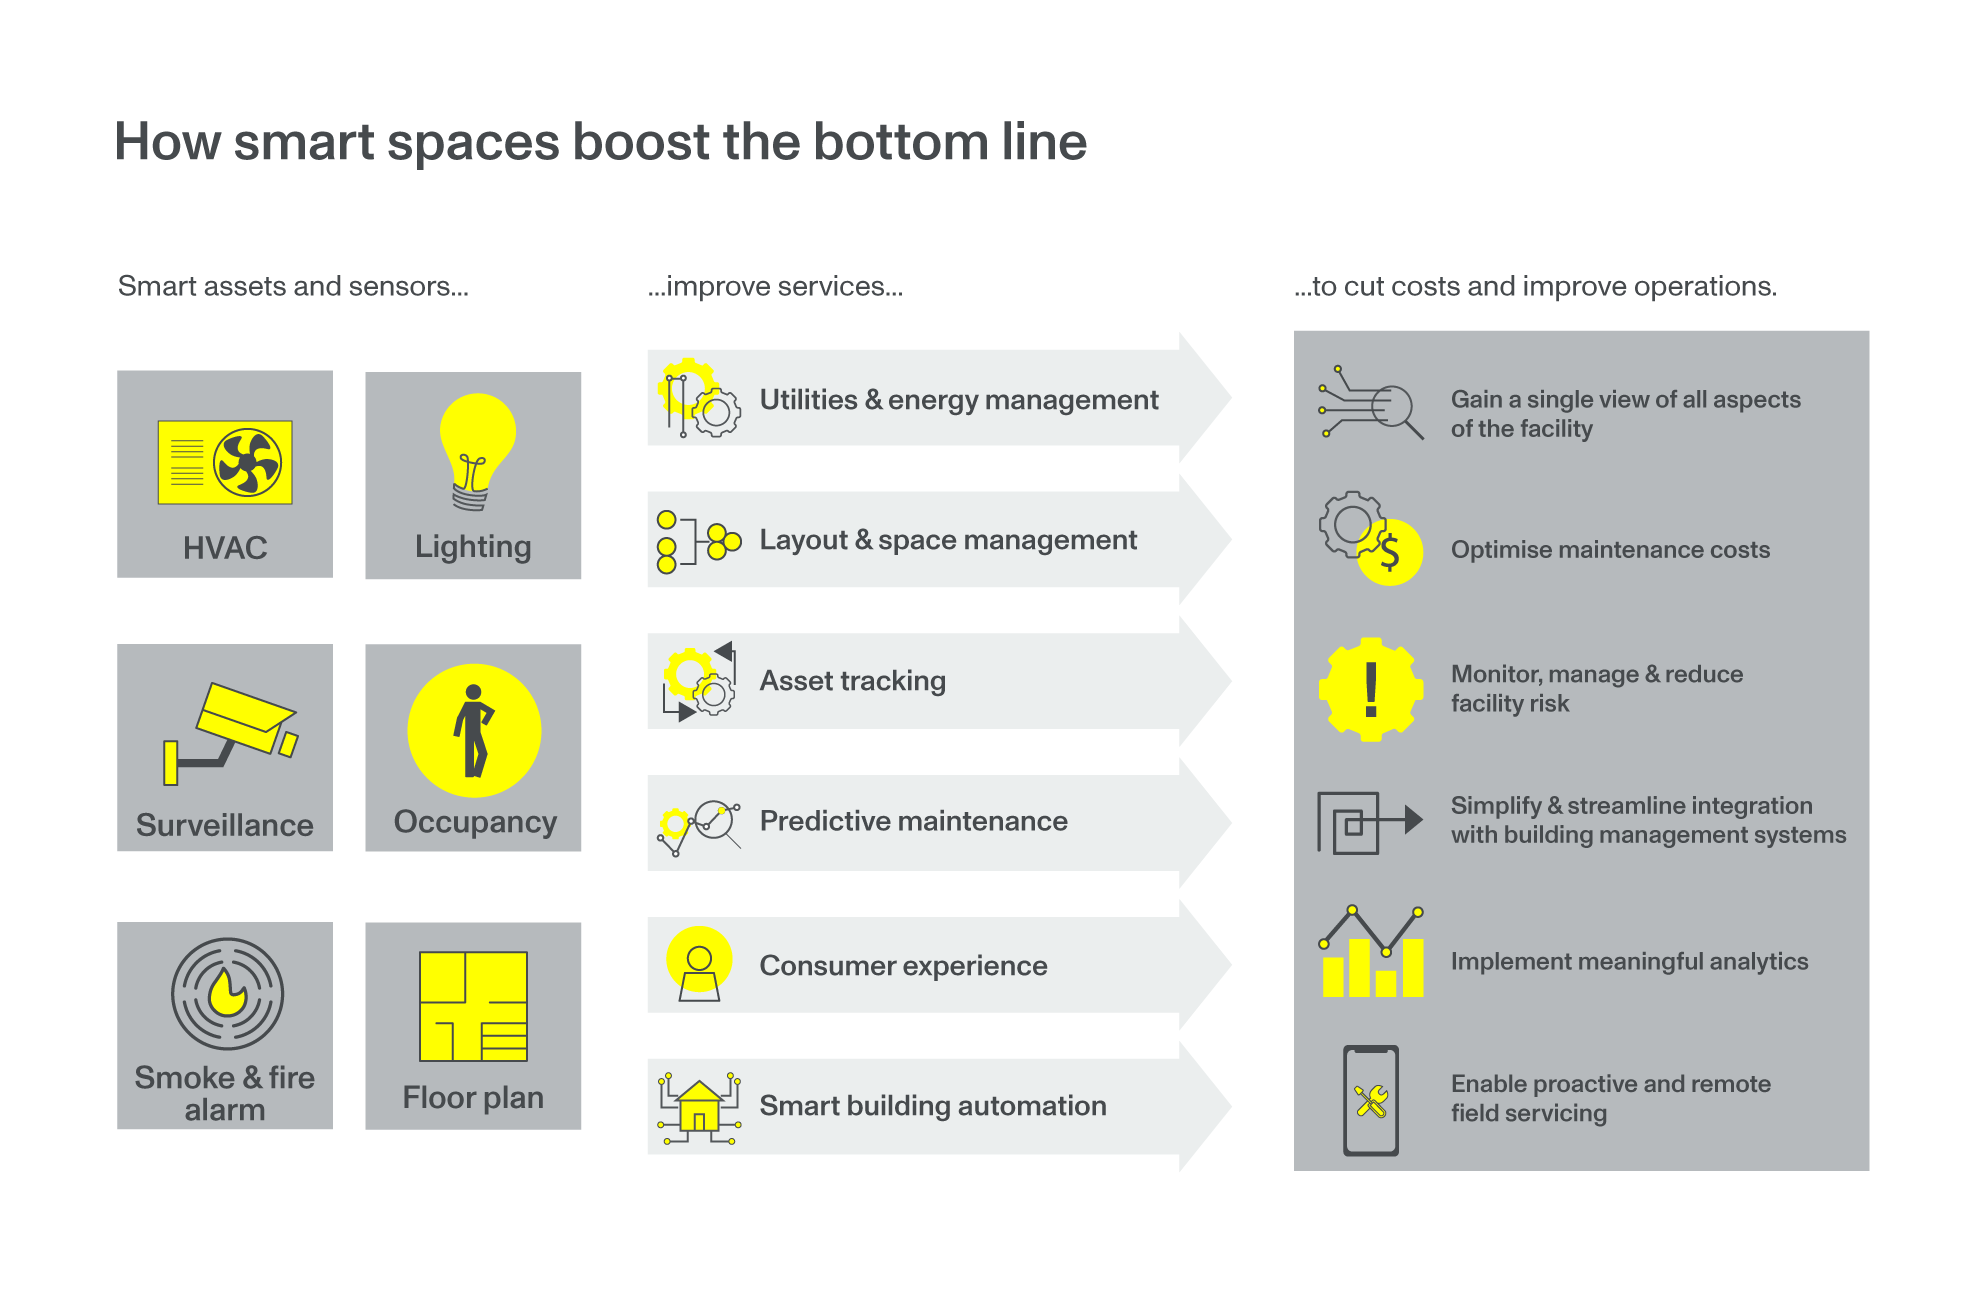 How smart spaces boost the bottom line